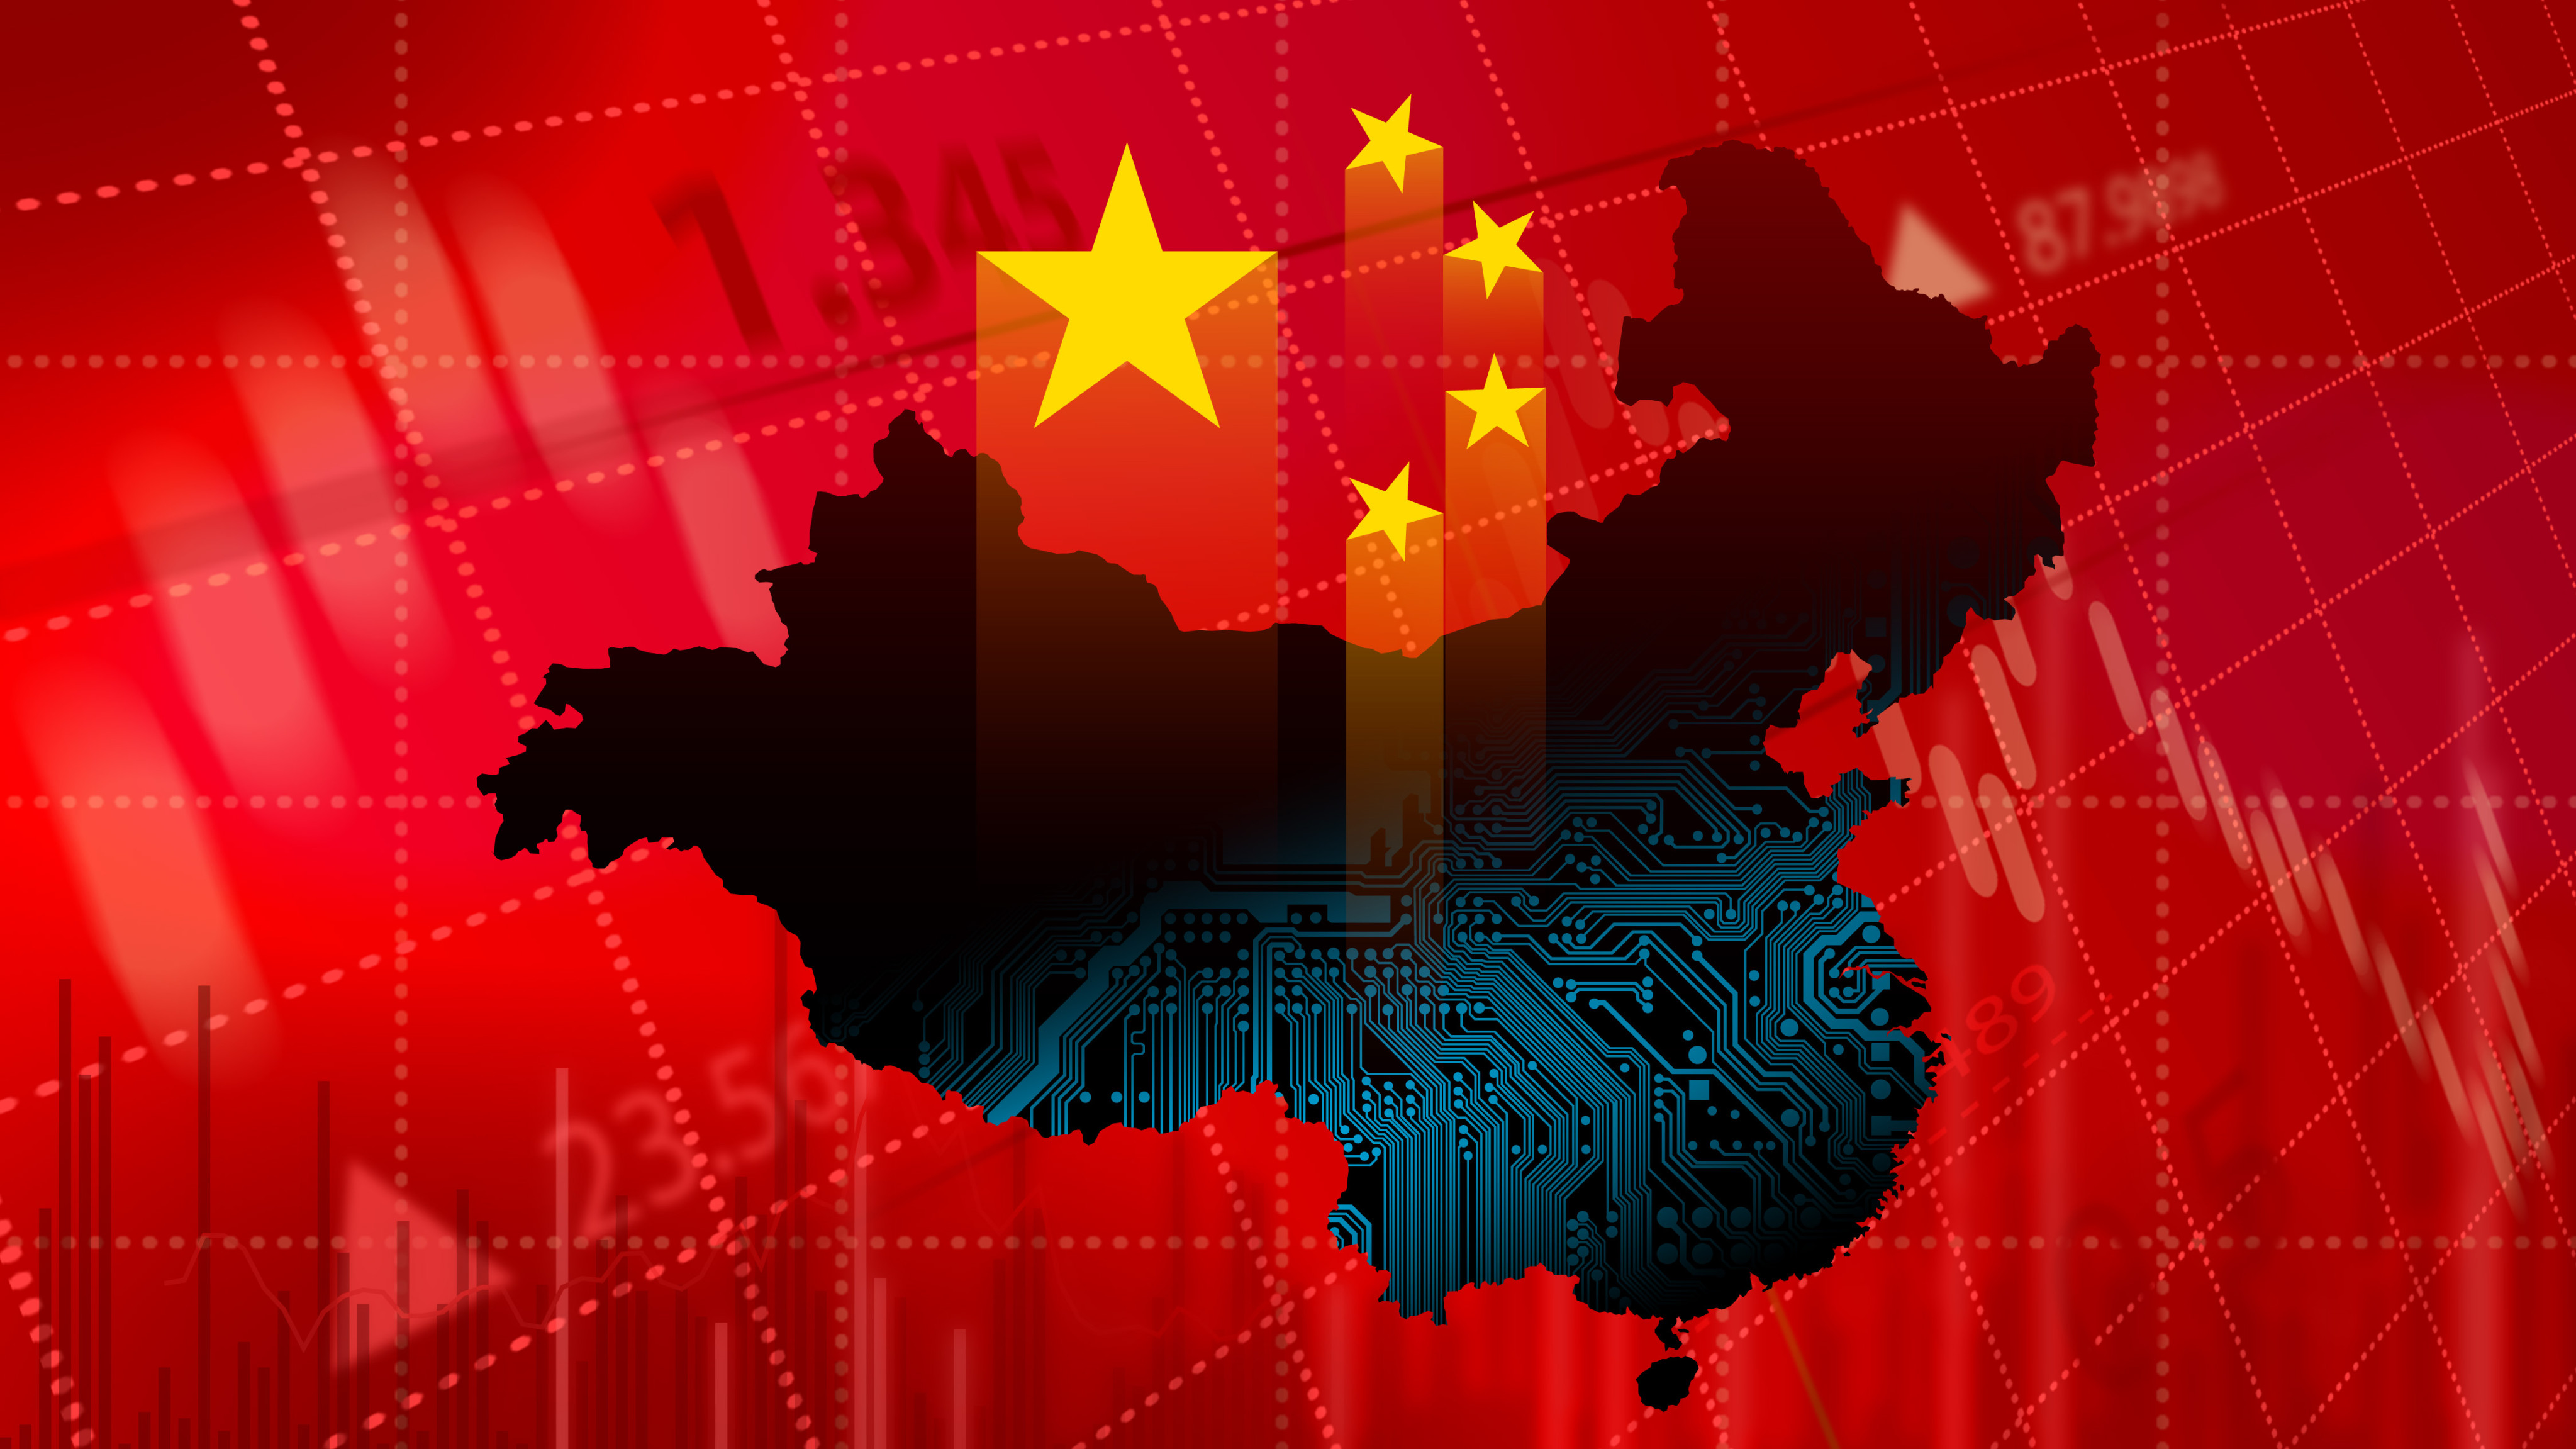 The science commission will oversee Beijing’s technological self-sufficiency drive as the United States doubles down on its containment of China. Photo: Shutterstock 